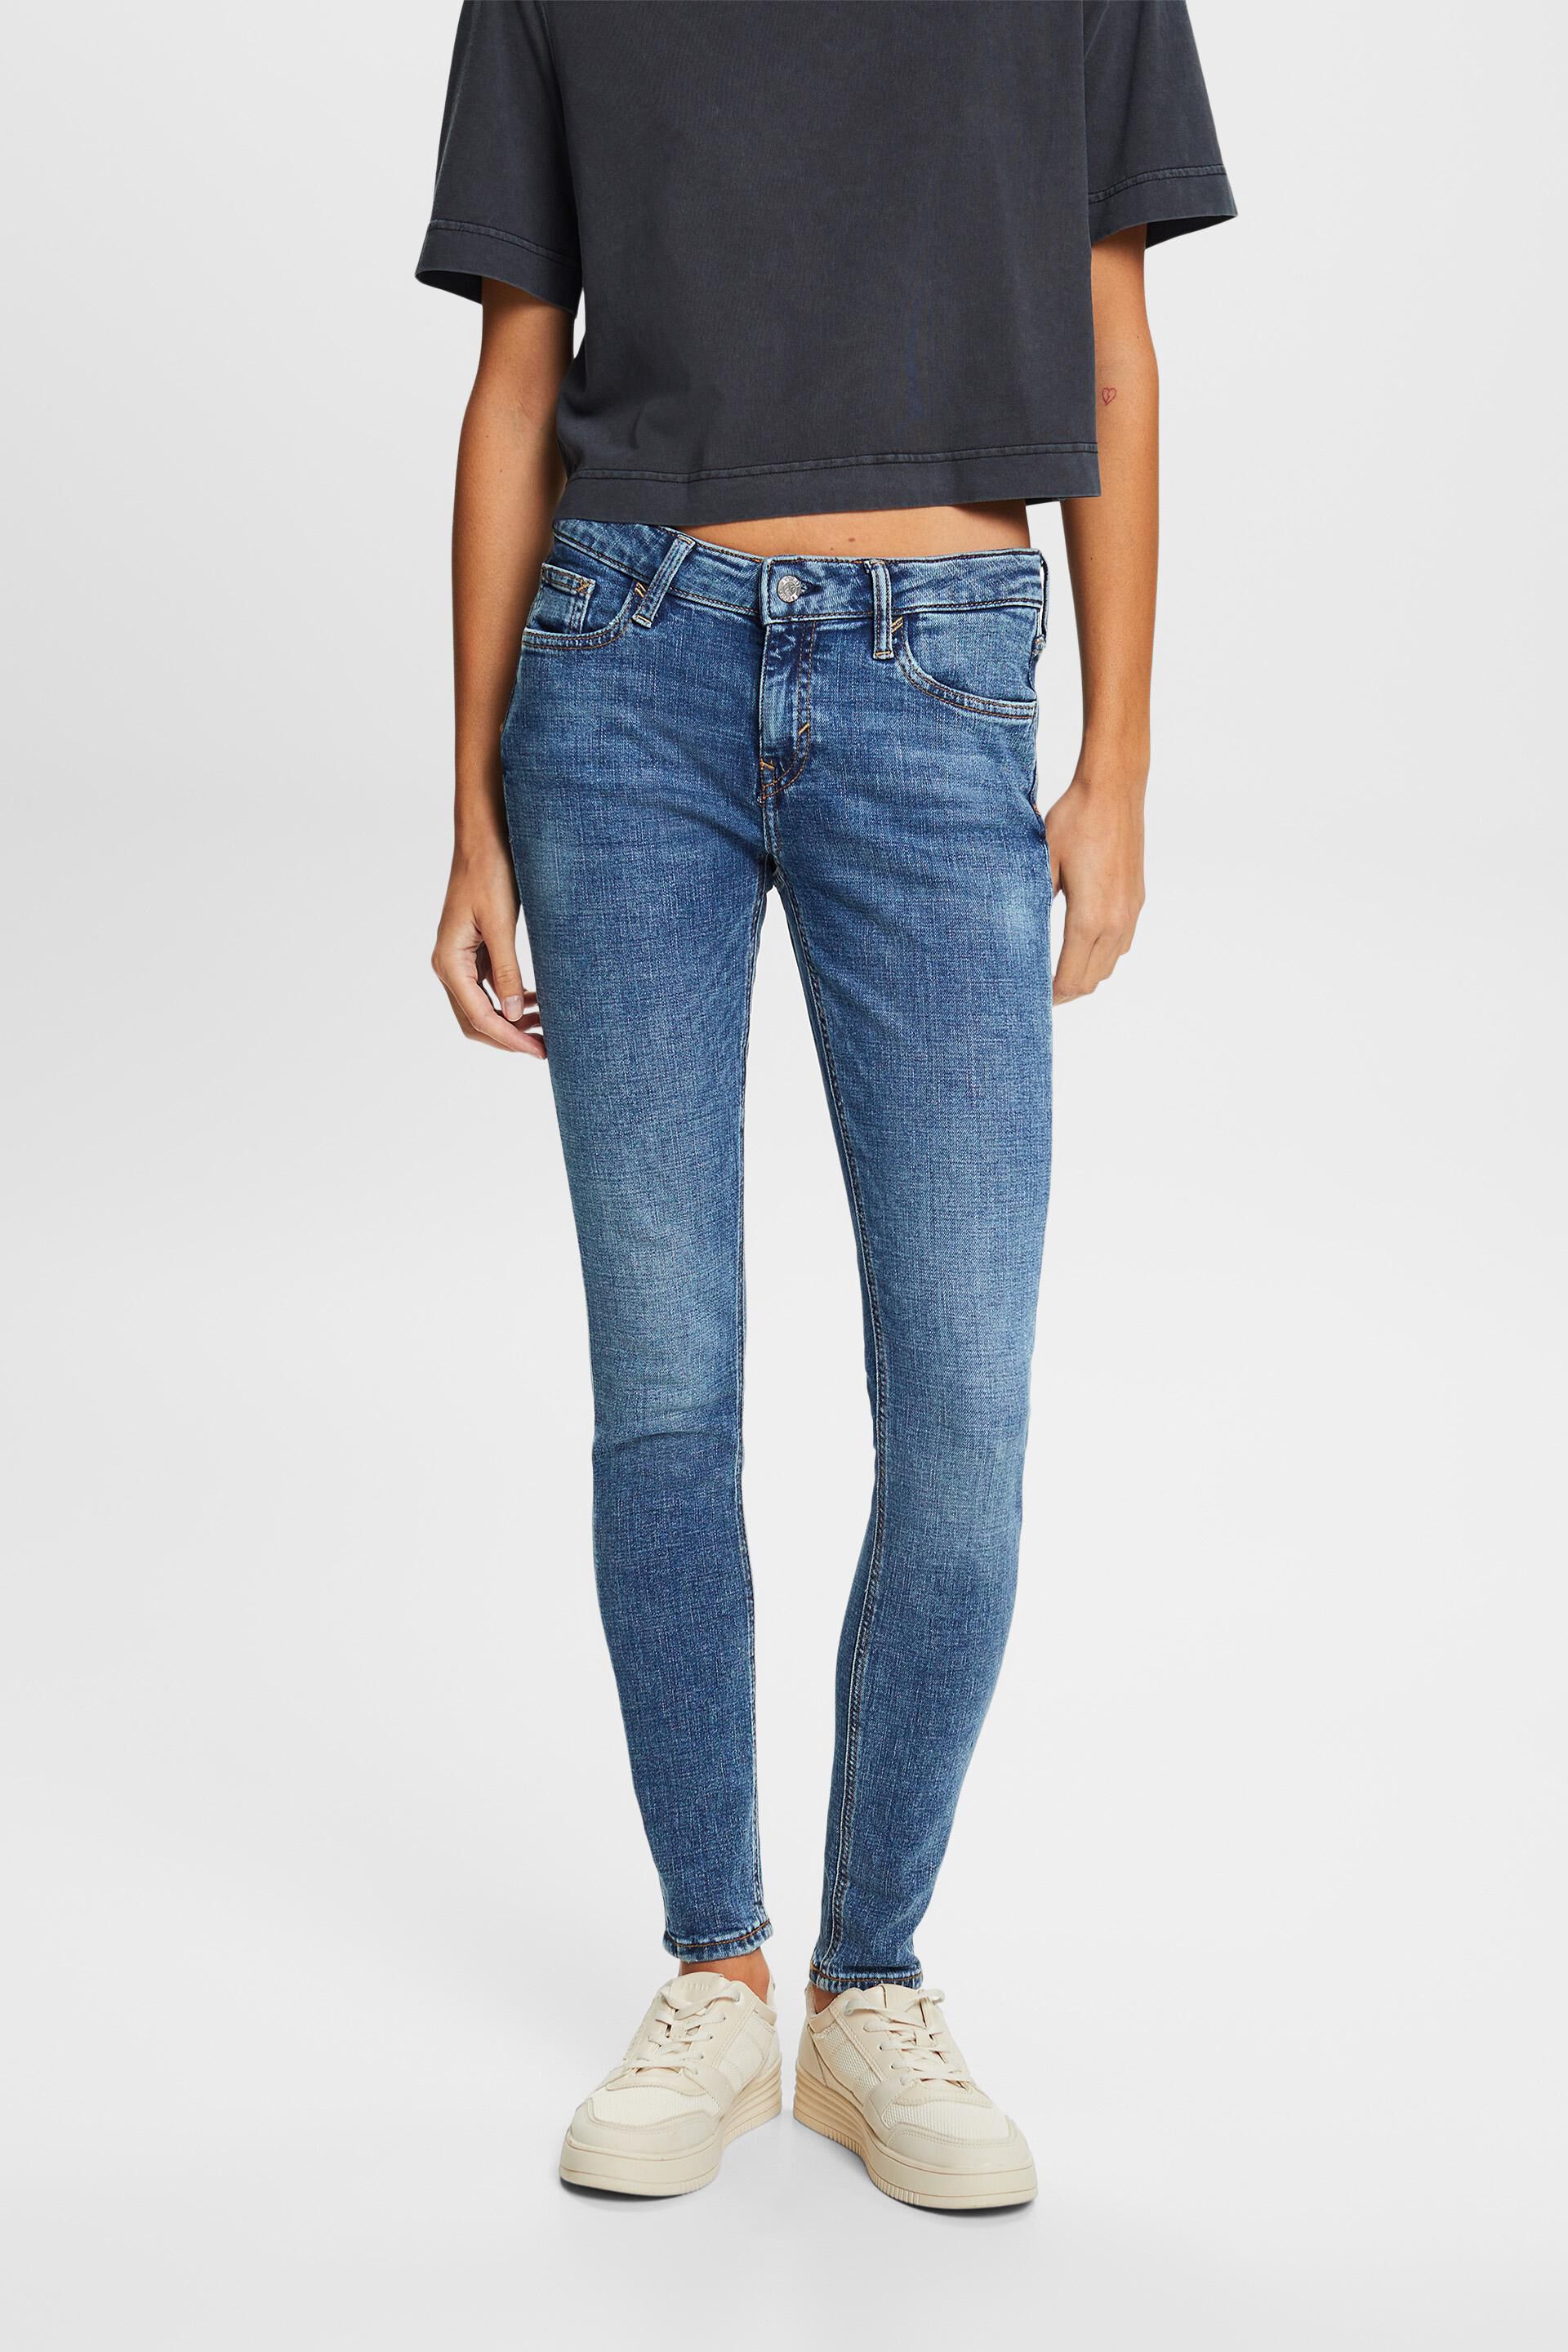 Esprit jeans stretch Recycled: skinny fit mid-rise